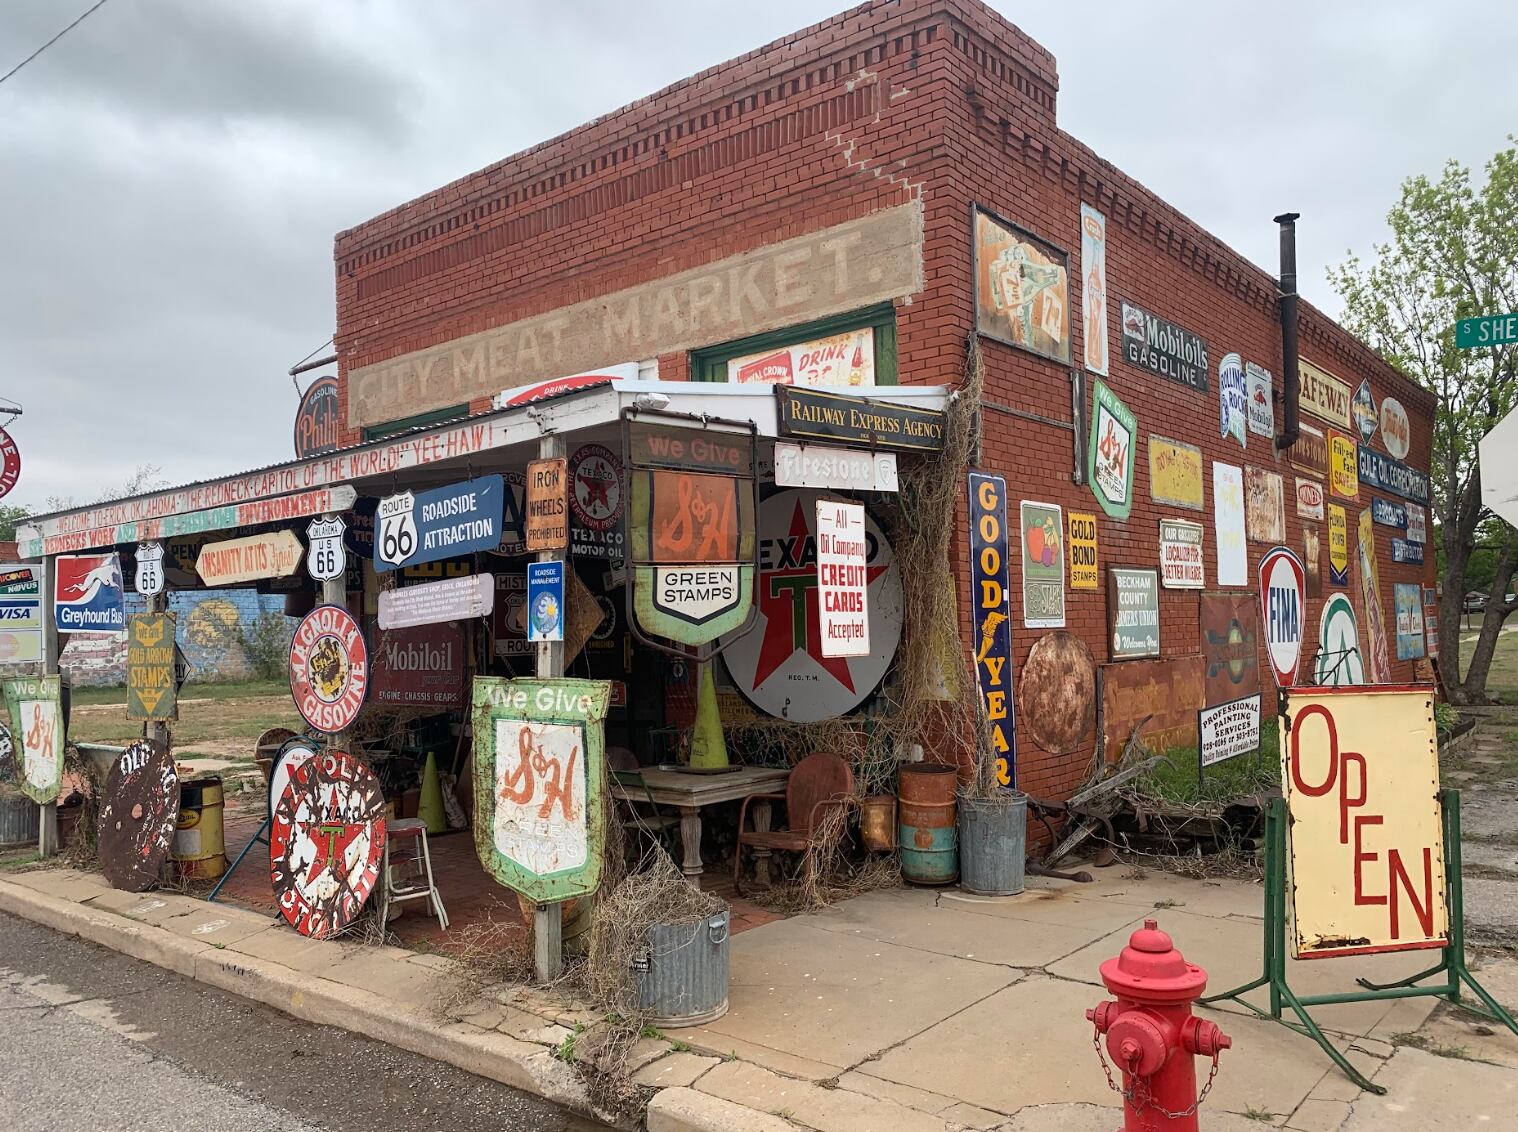 The Sandhill Curiosity Shop in Erick, OK is where you'll find Harley Russell, the famed 'hillbilly hoarder' of Route 66 who is believed to have been the inspiration of the character Mater in Pixar's Cars.